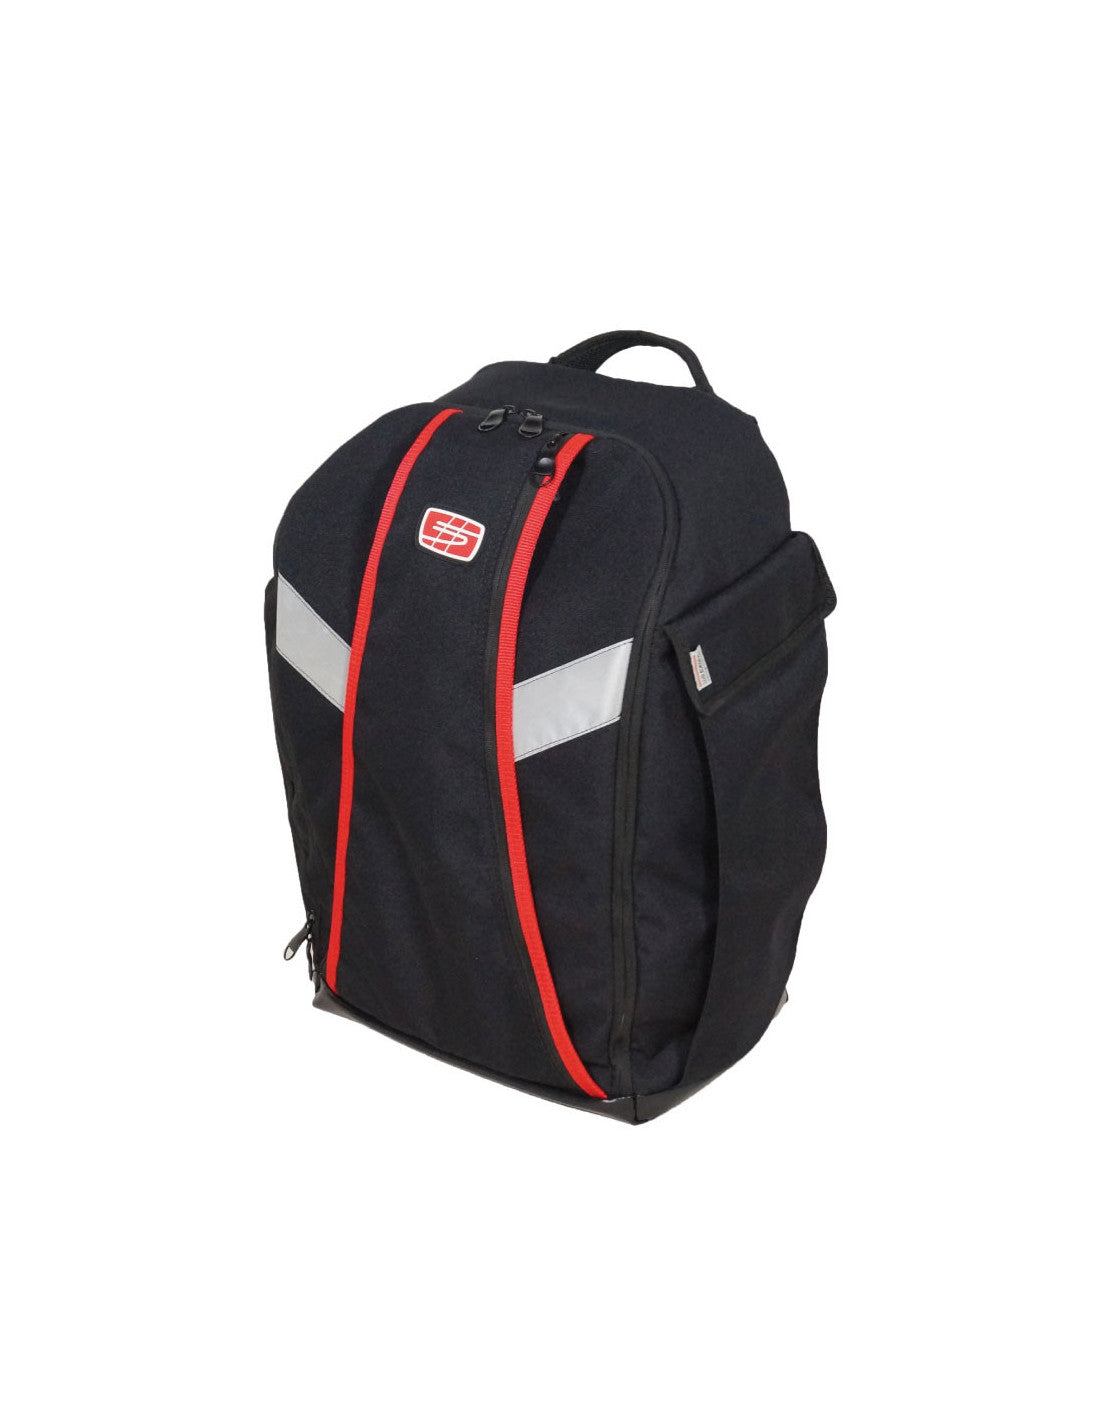 Intervention backpack - 500773